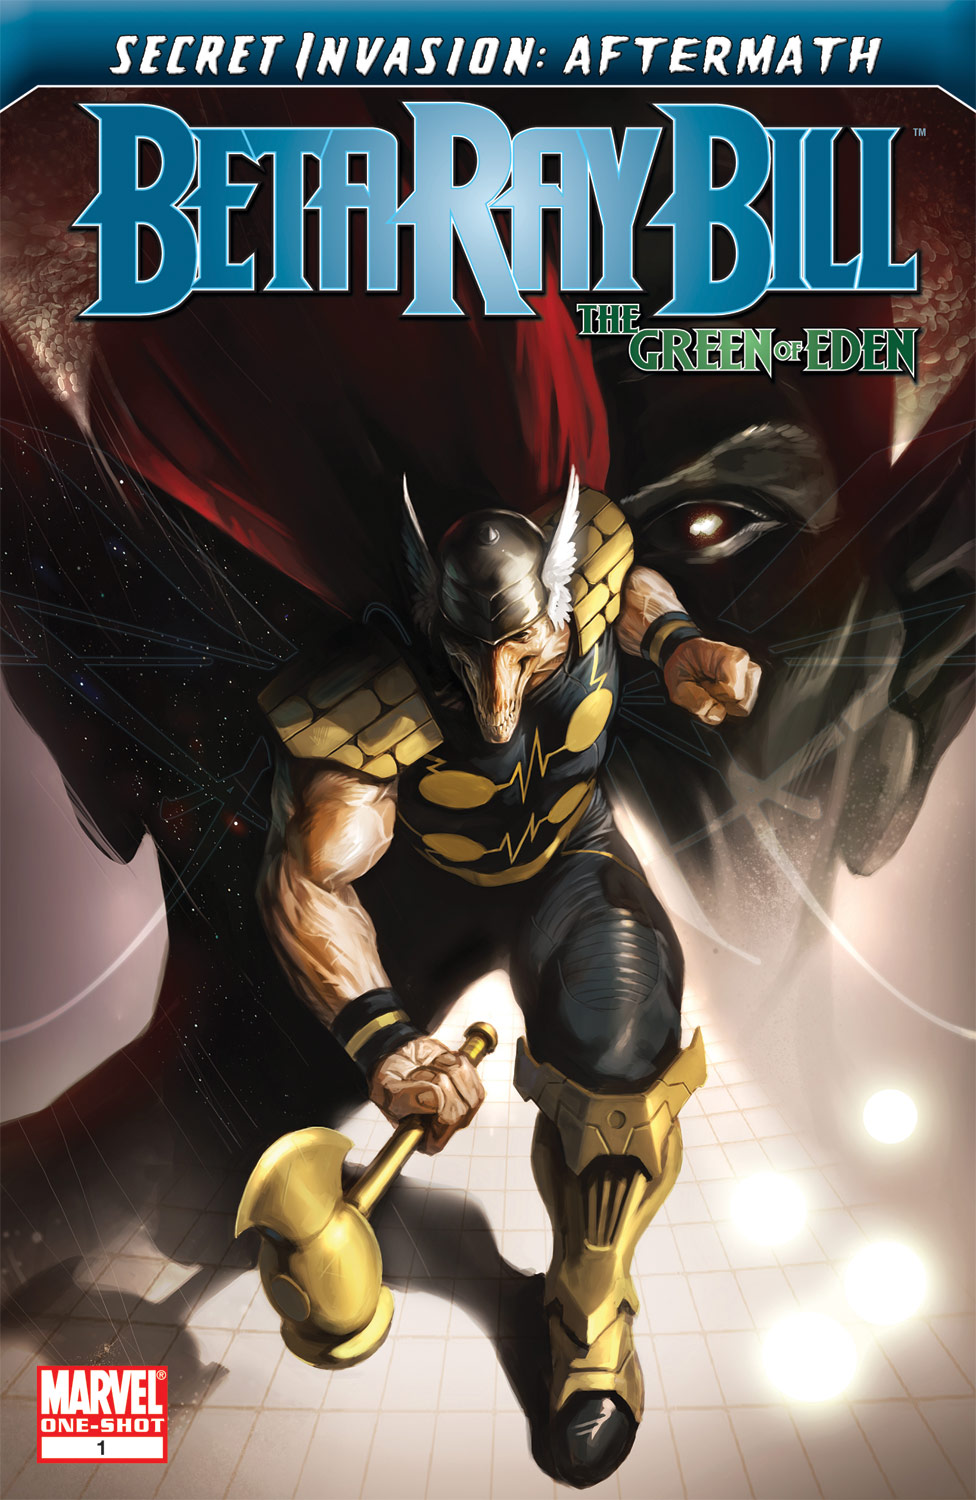 Read online Secret Invasion Aftermath: Beta Ray Bill - The Green of Eden comic -  Issue # Full - 1